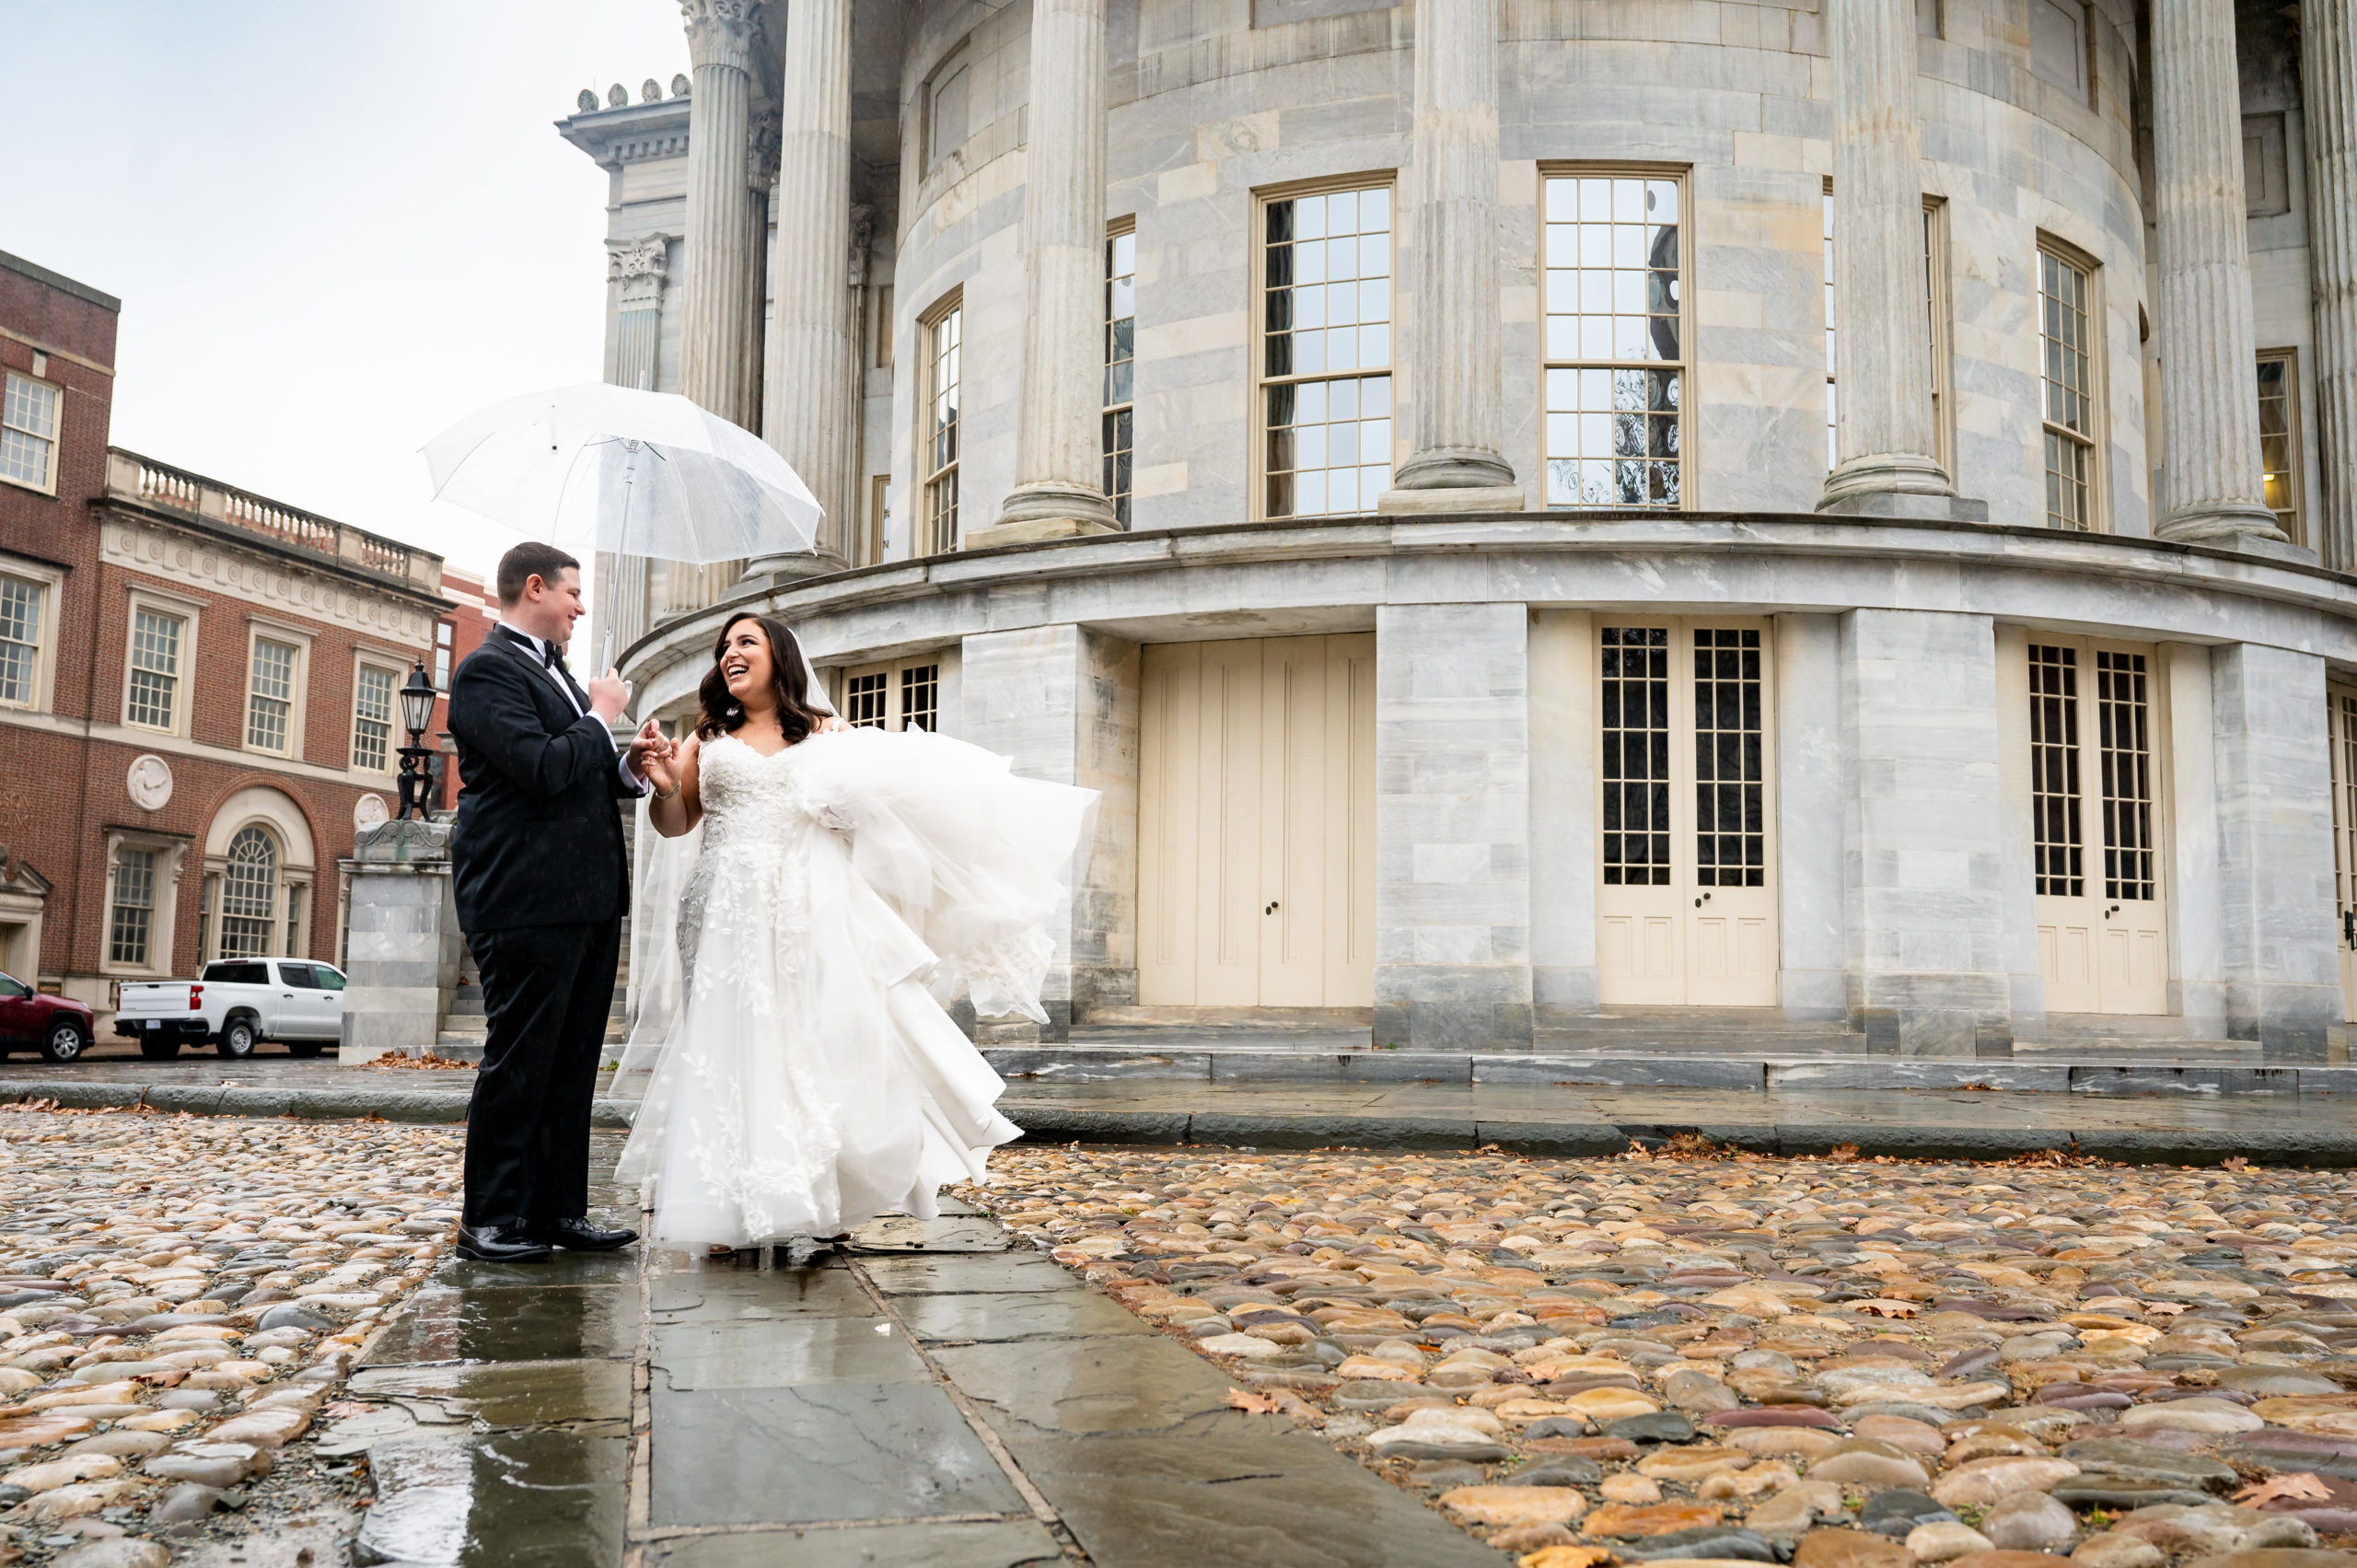 Rainy wedding photo of a couple holding an umbrella in front of Merchant's Exchange Building in Philadelphia PA